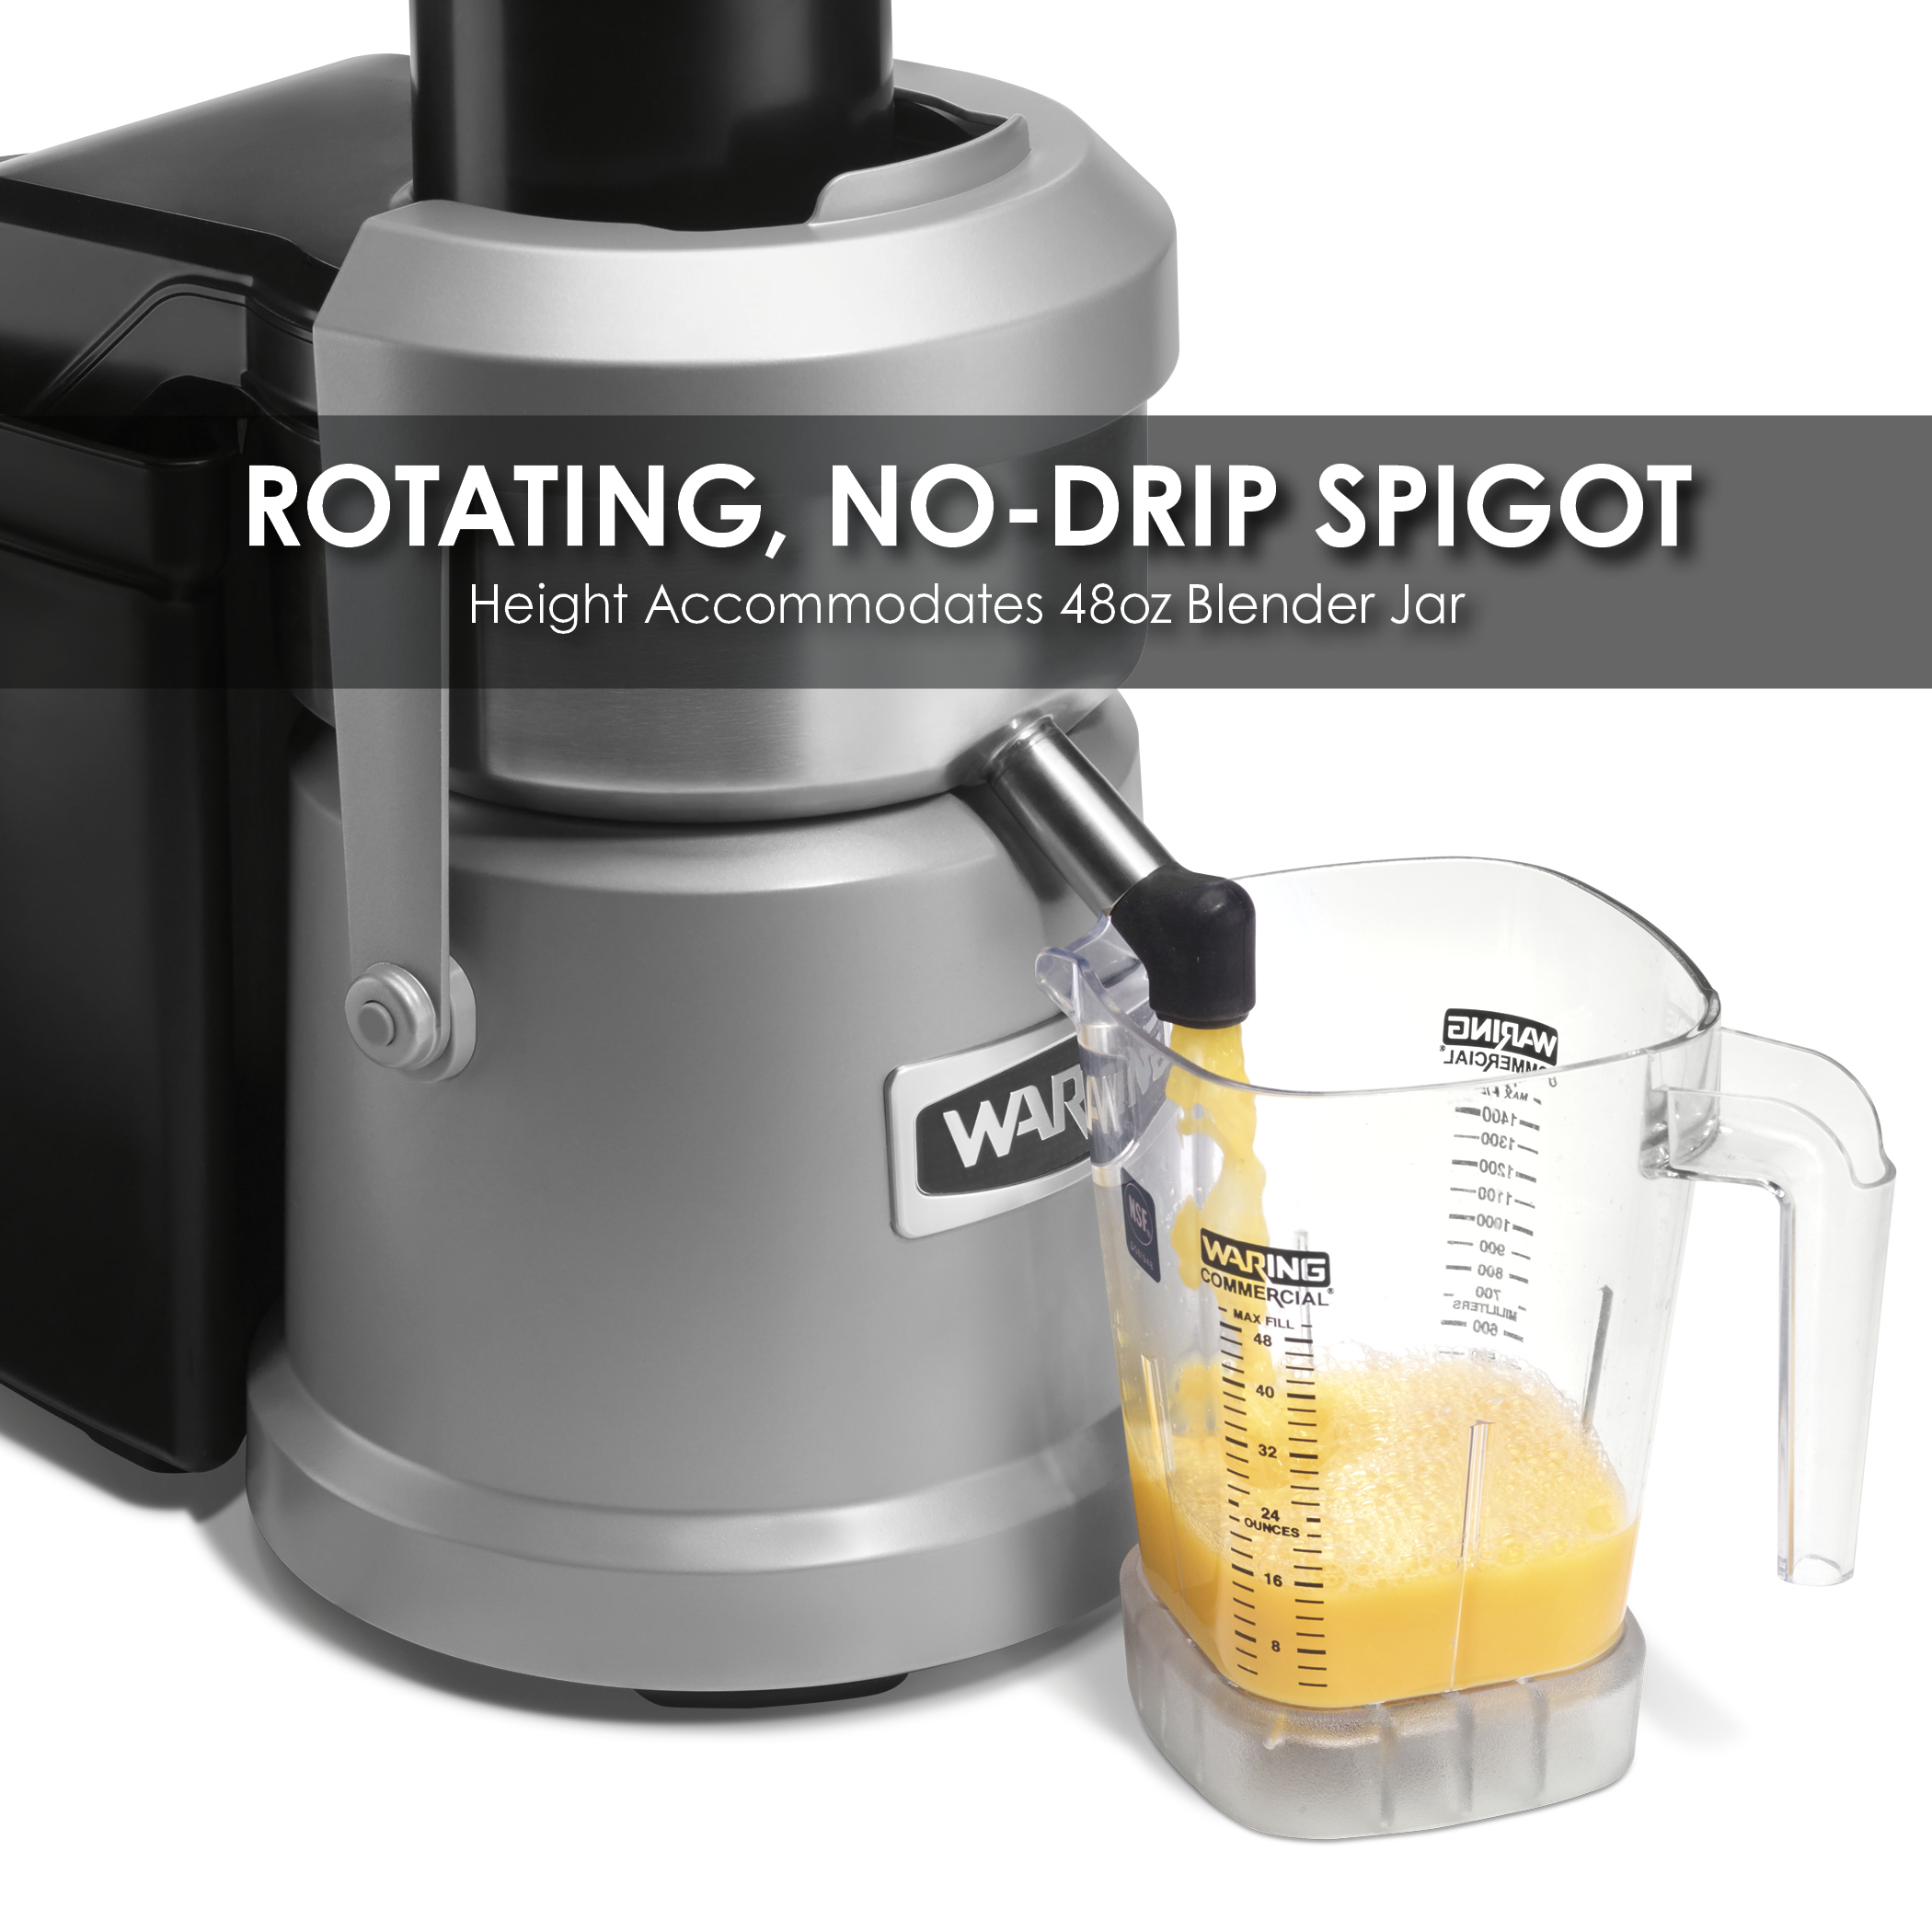 Waring Commercial Medium-Duty Pulp-Eject Juice Extractor, Made in Italy